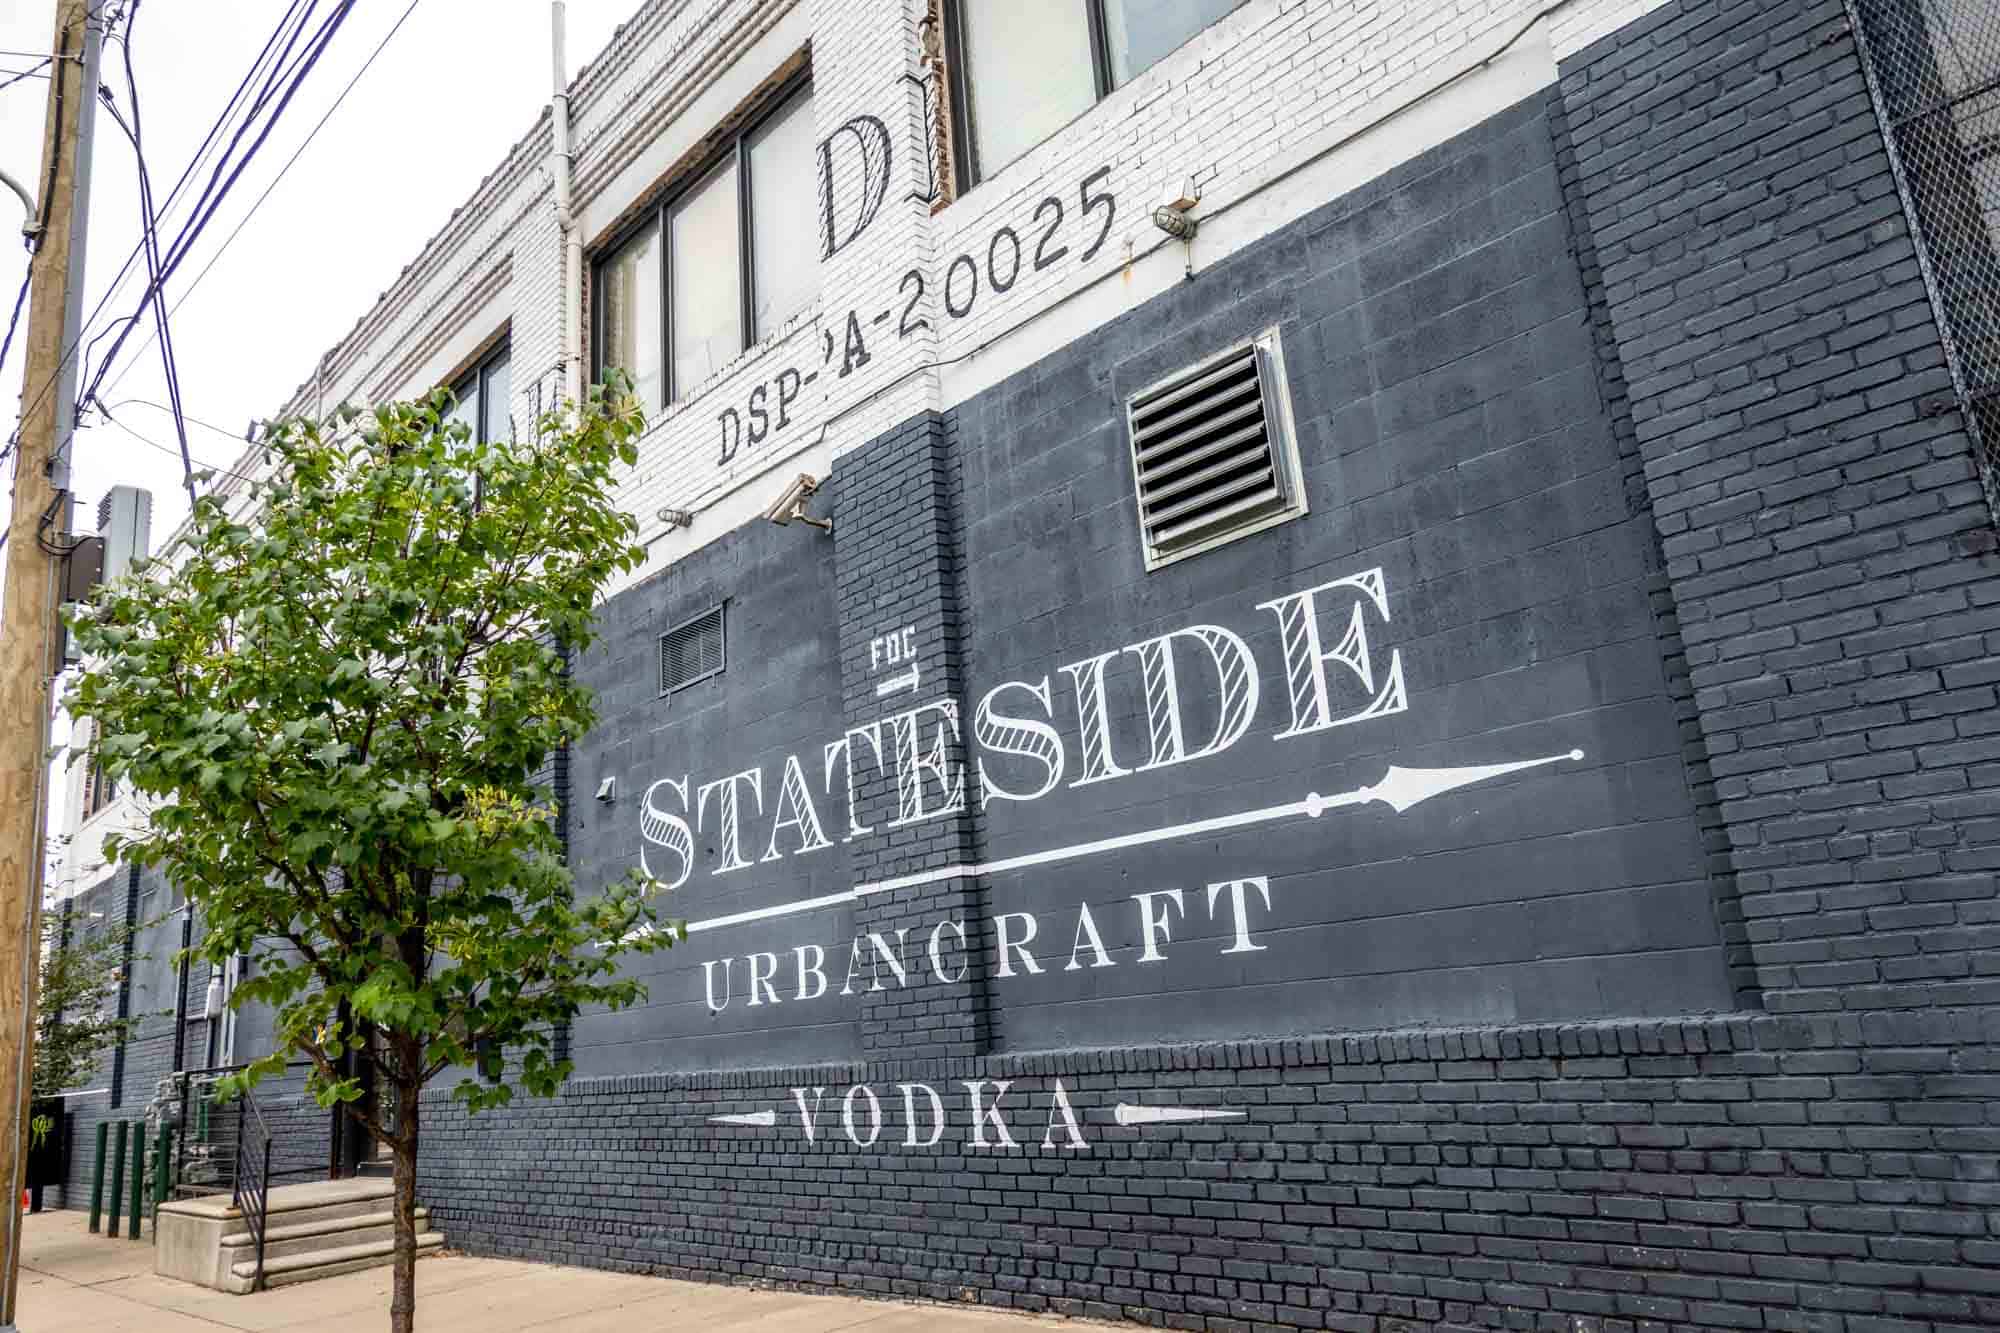 Black wall painted with a sign "Stateside Urbancraft Vodka"